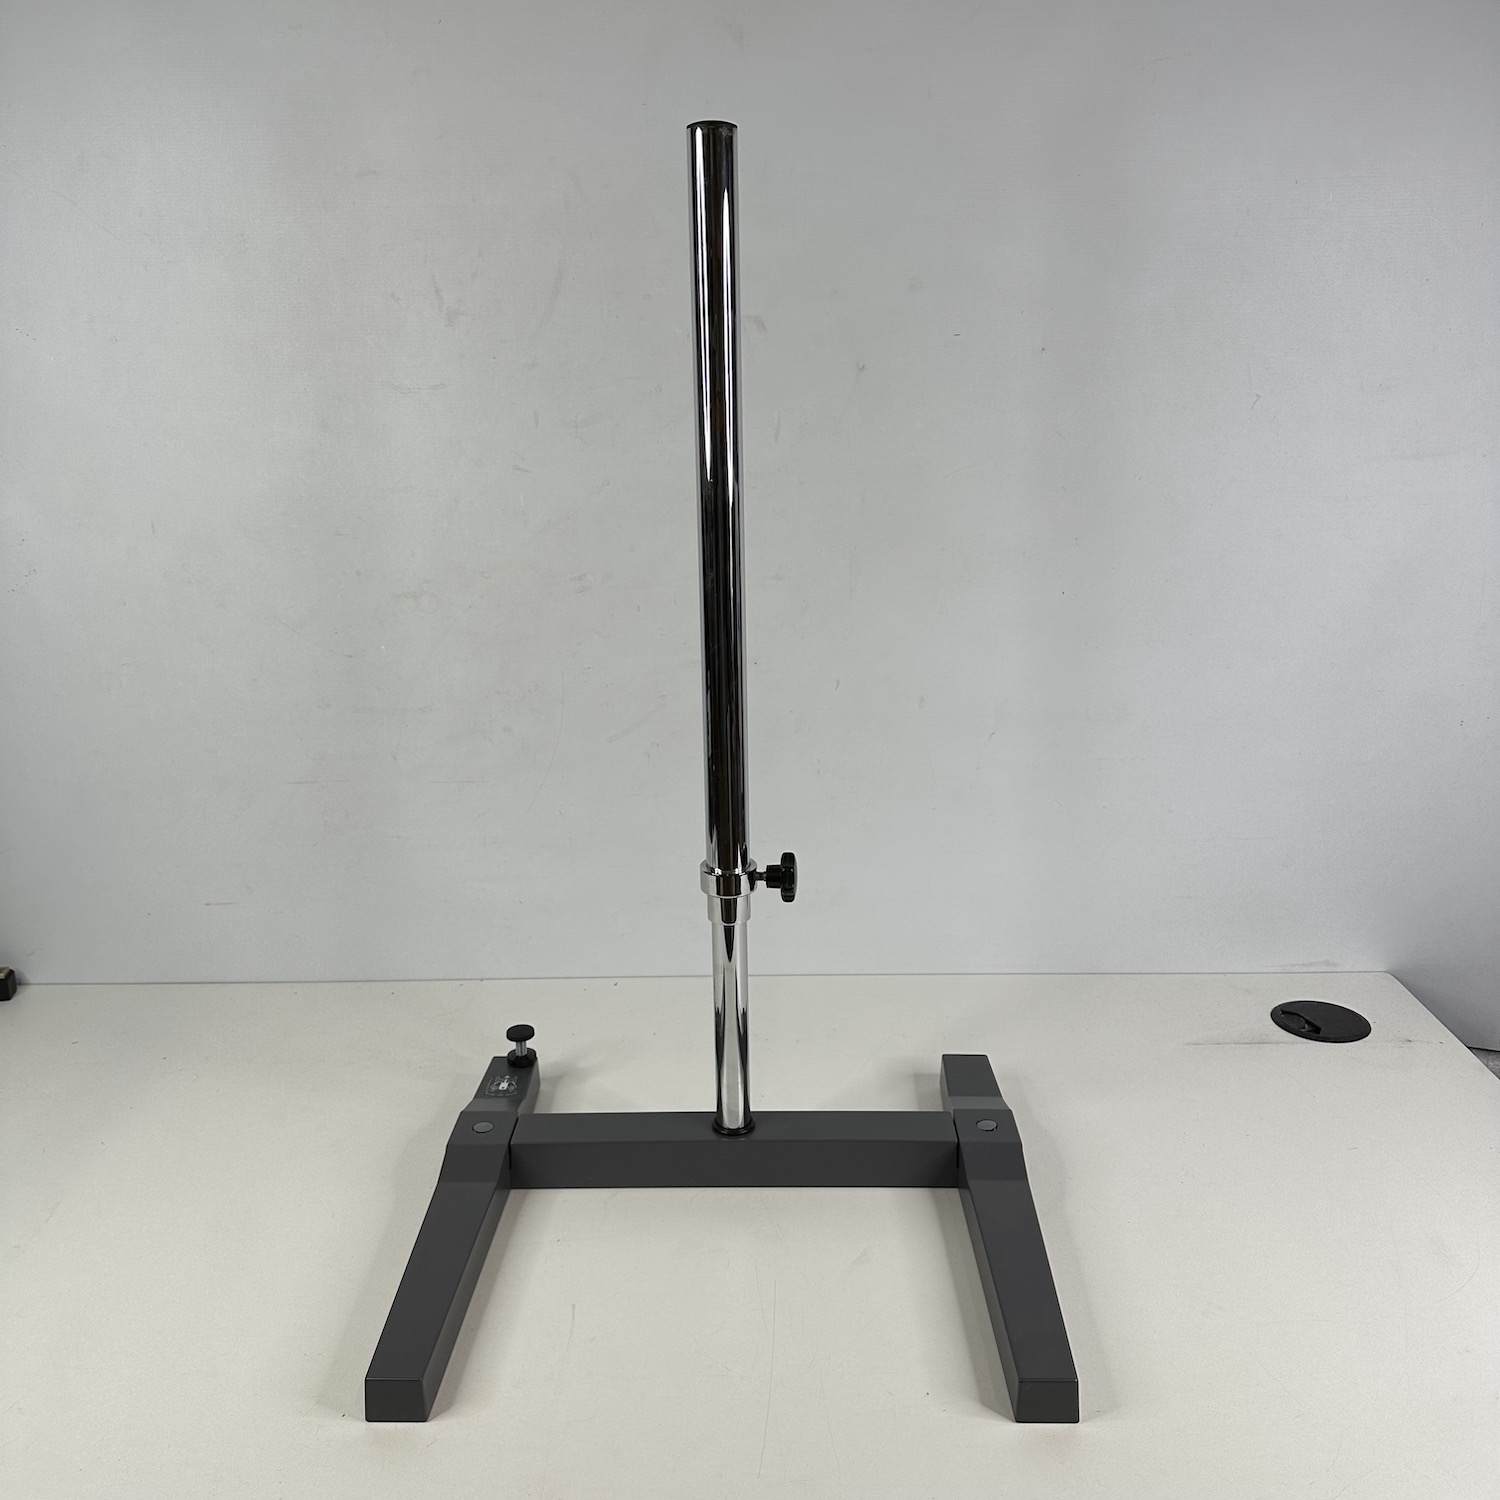 h stand | ika | r 2723 telescopic stand | 0001412100